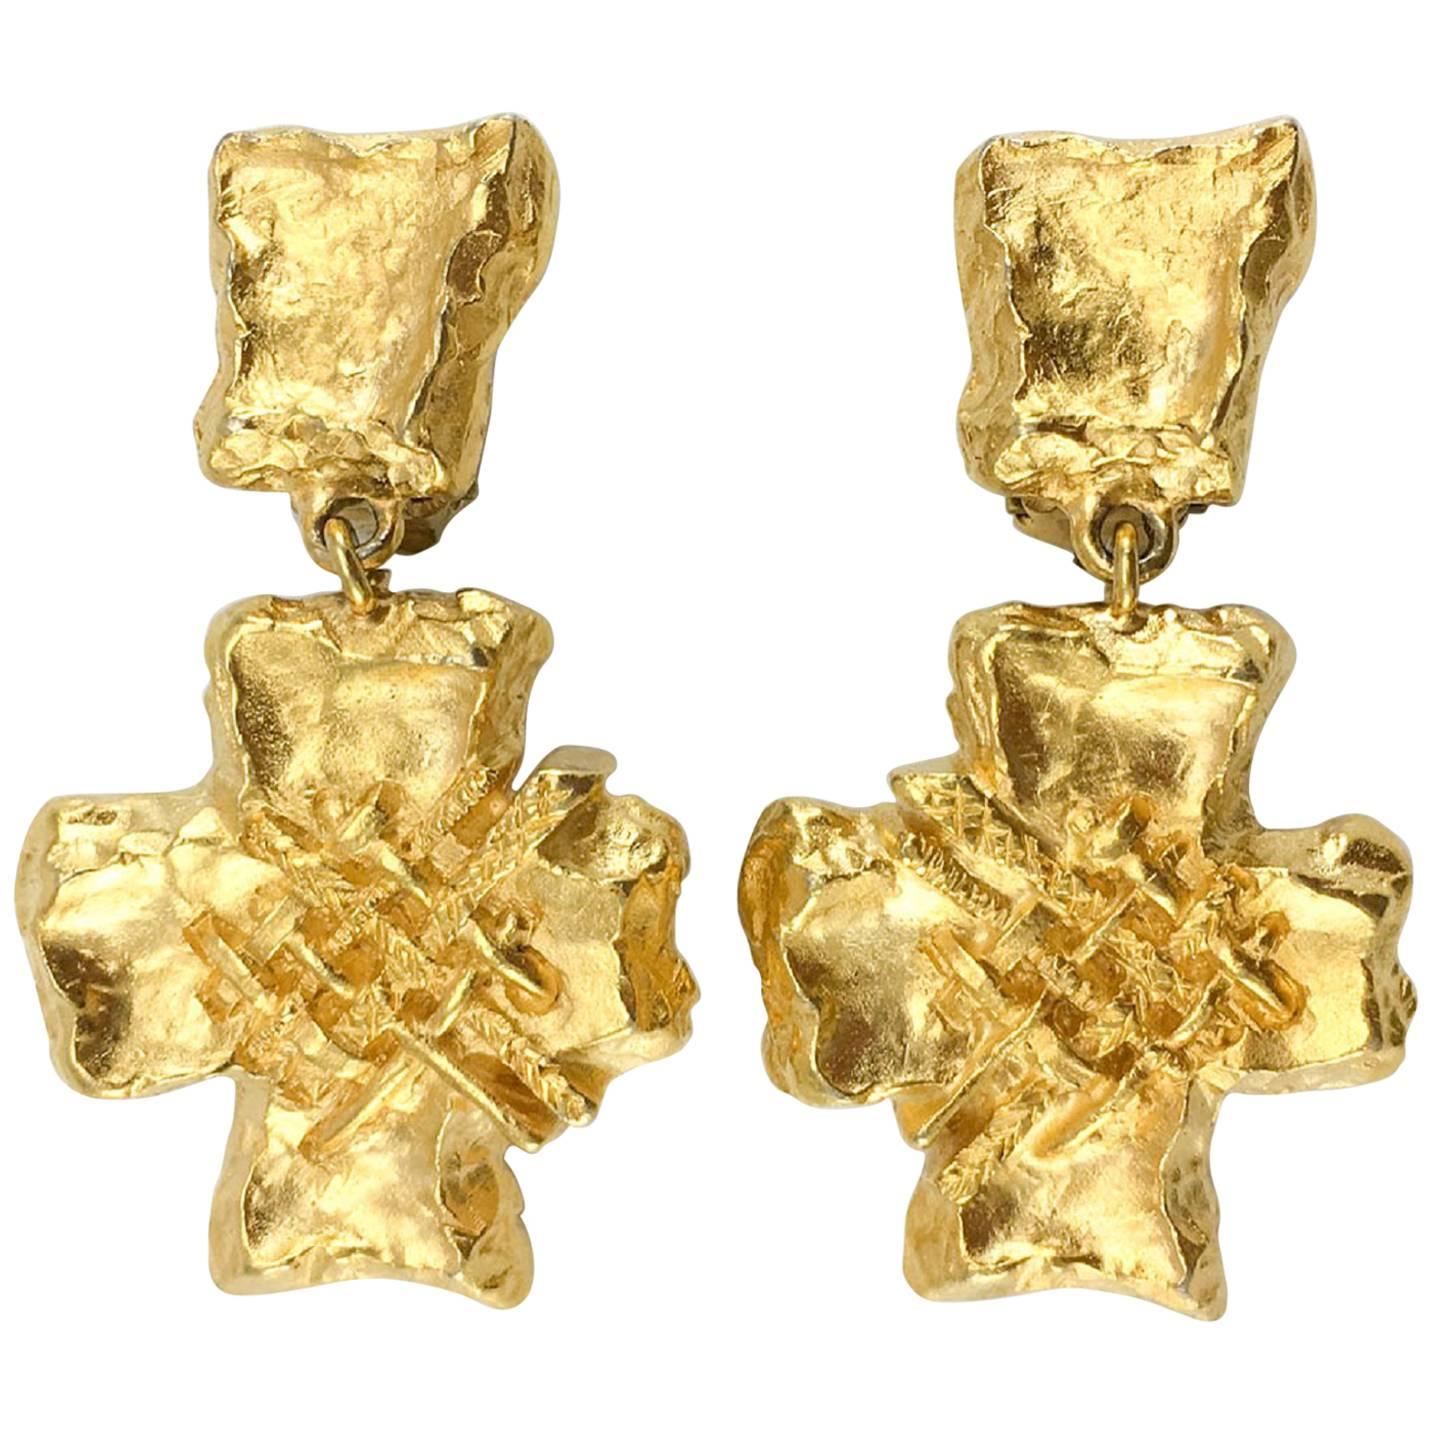 Lacroix Stylized Gold-Plated Cross, by Goossens - 1980s